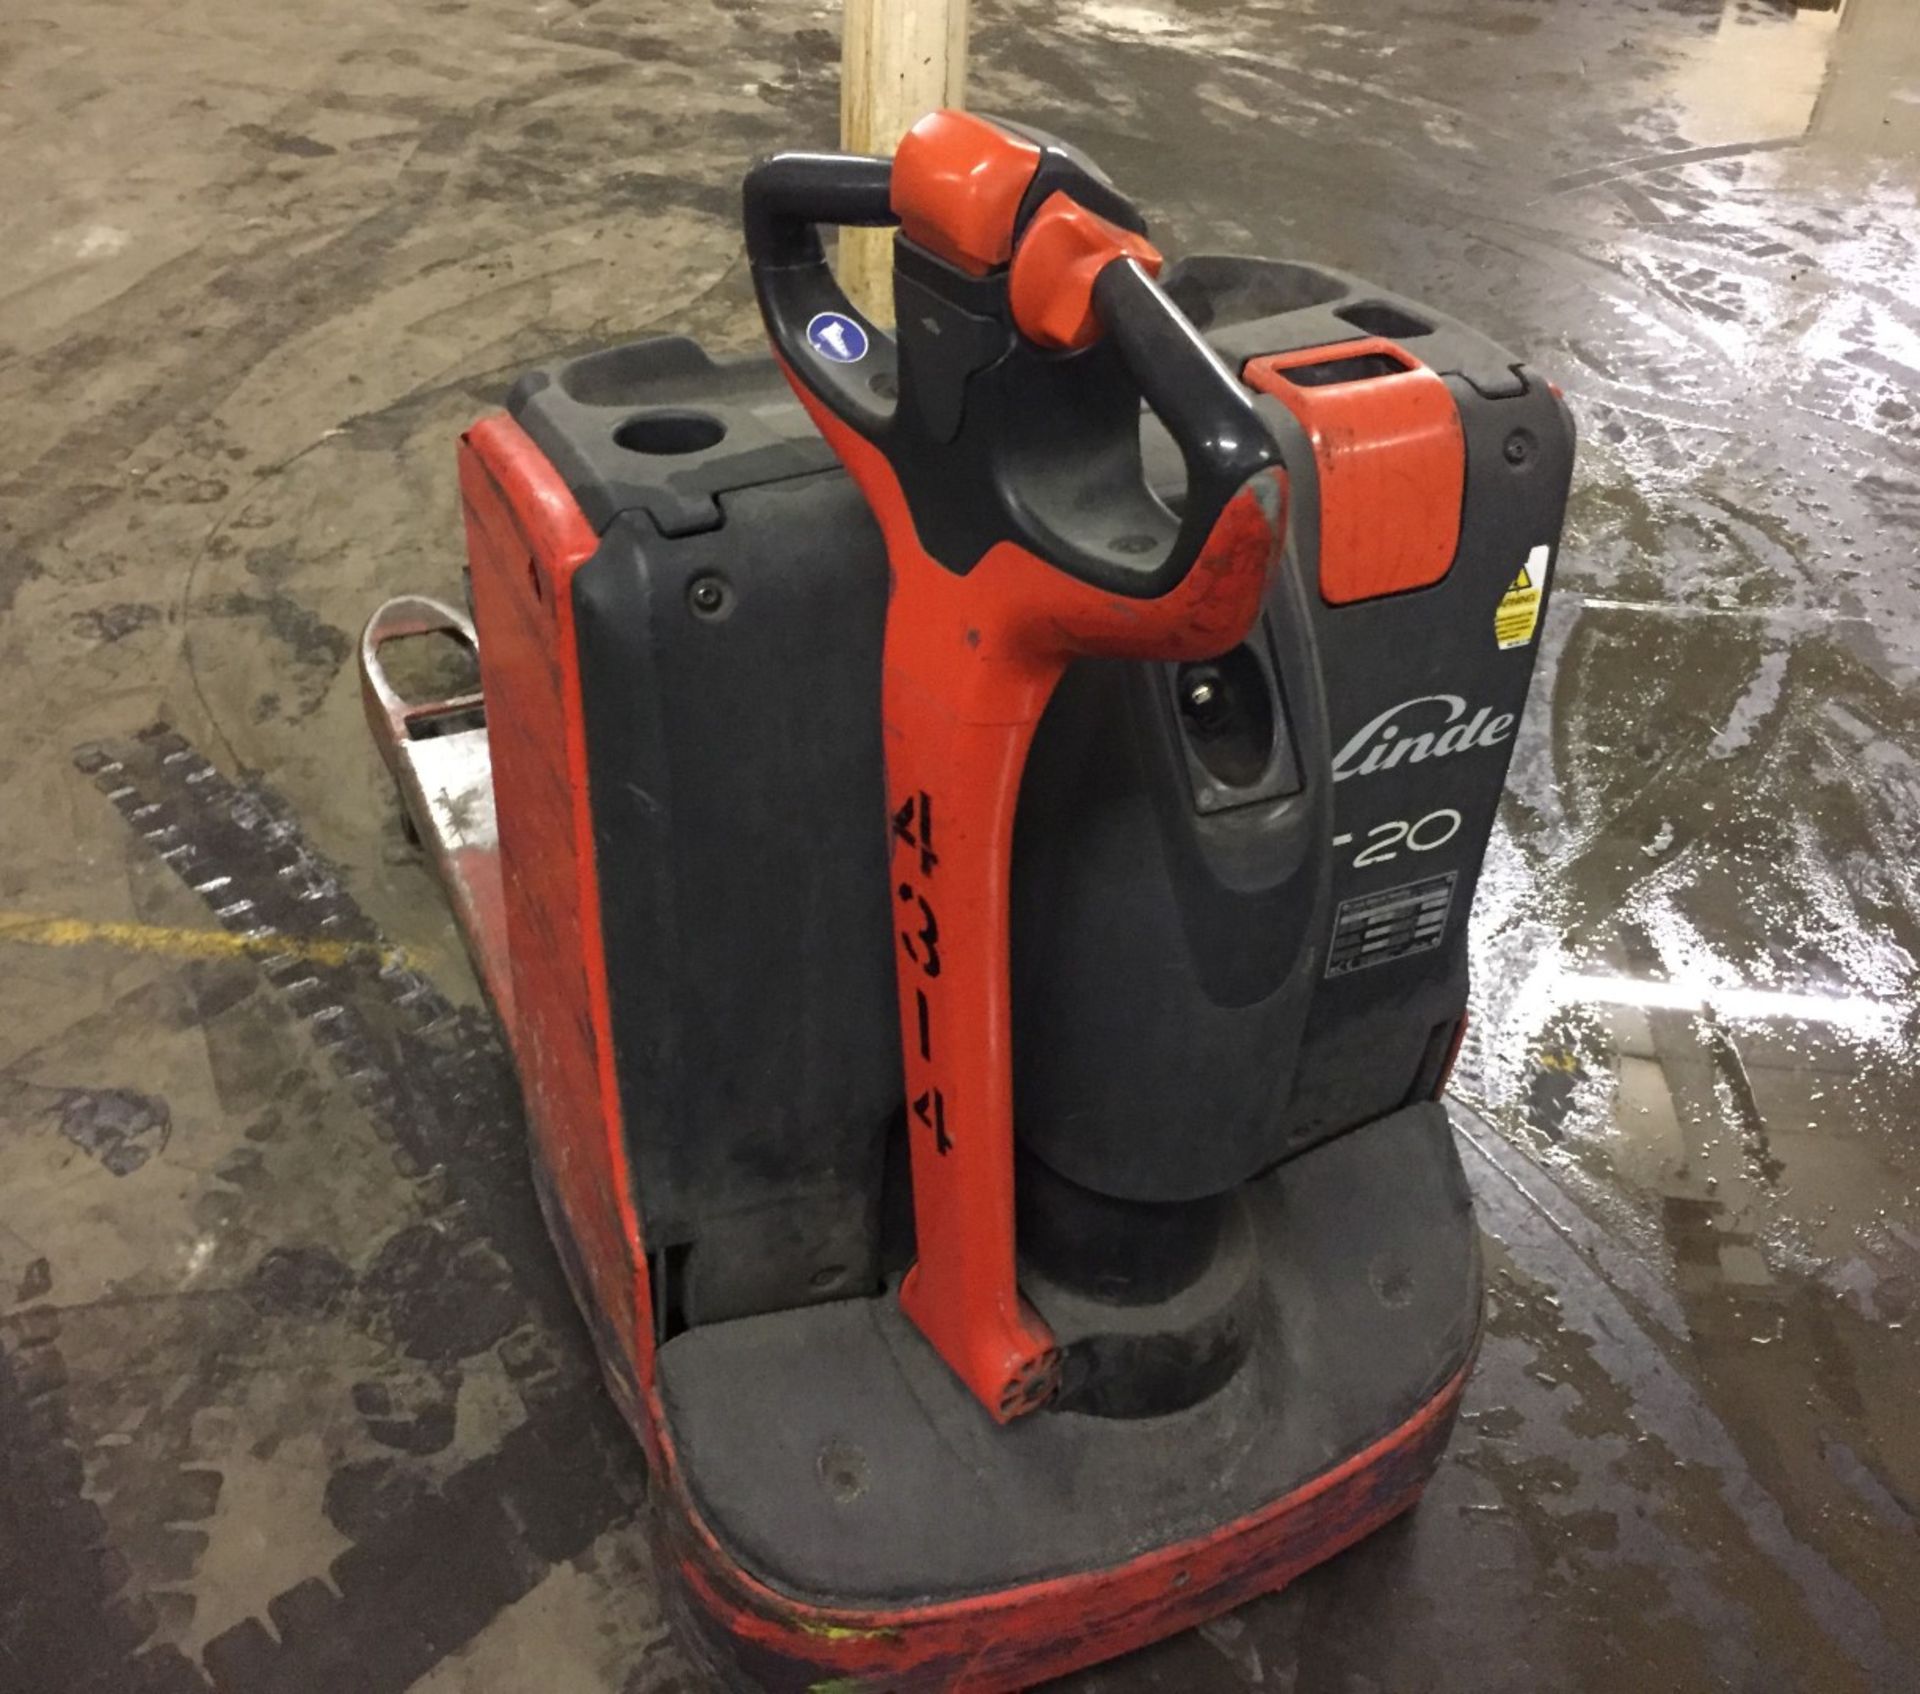 1 x Linde T20 Electric Pallet Truck - Tested and Working - Charger Included - CL007 - Ref: T20/1 - - Bild 5 aus 12